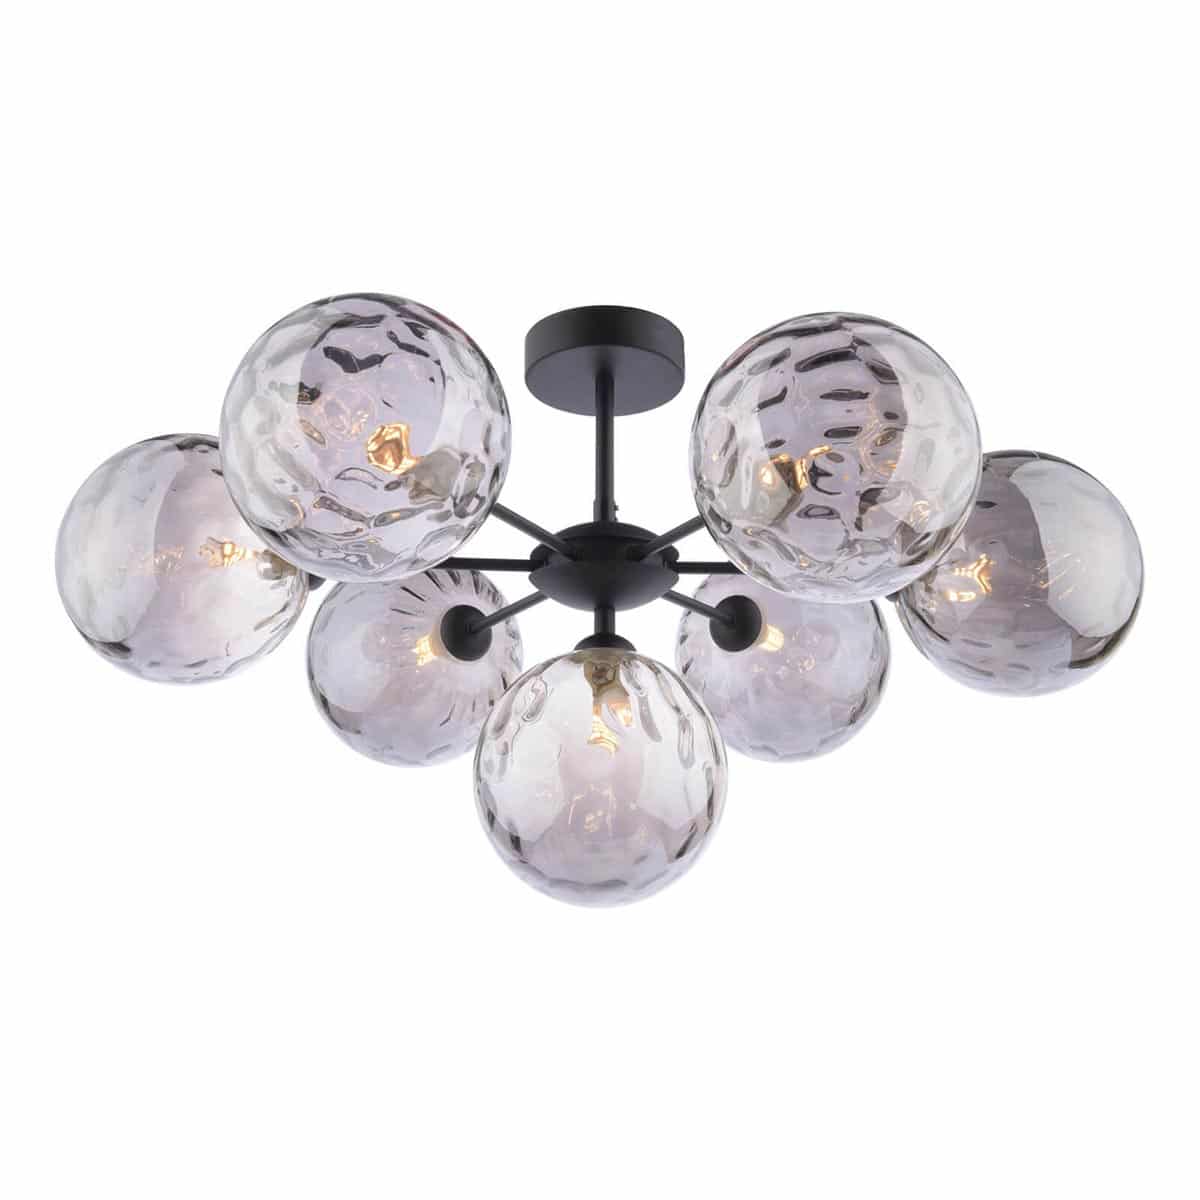 Dar Cohen 7 Arm Low Ceiling Light Black Smoked Dimpled Glass